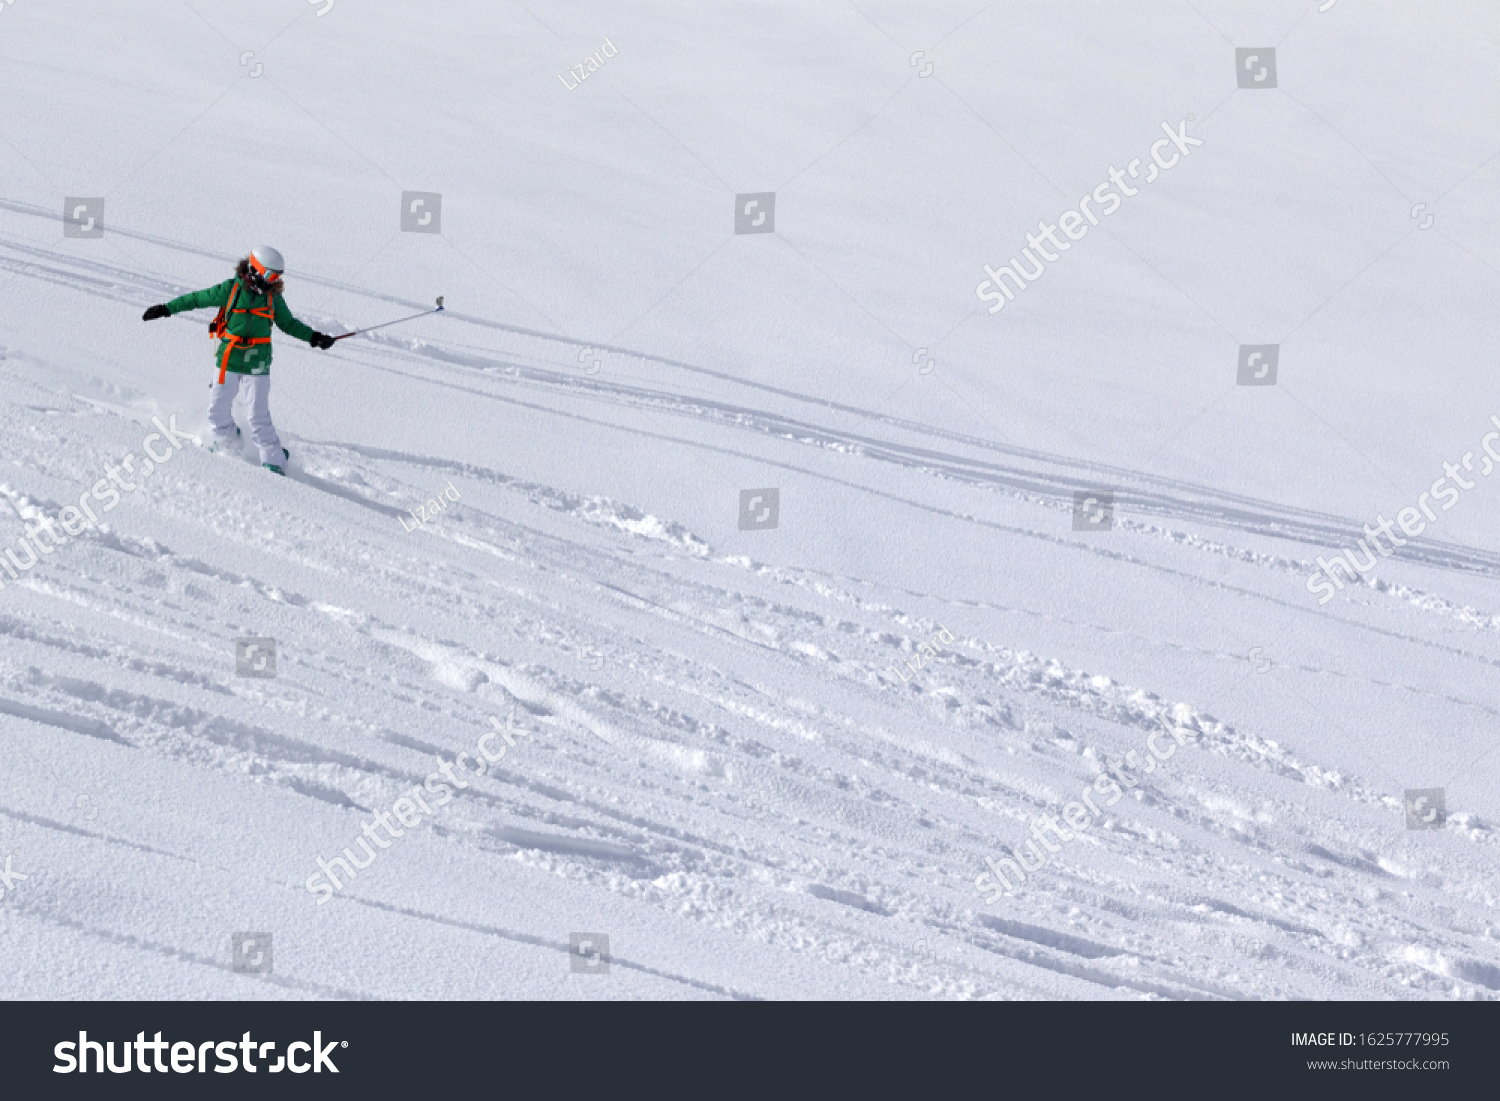 Snowboarder downhill on snowy off piste slope with newly-fallen snow at high winter mountains #1625777995